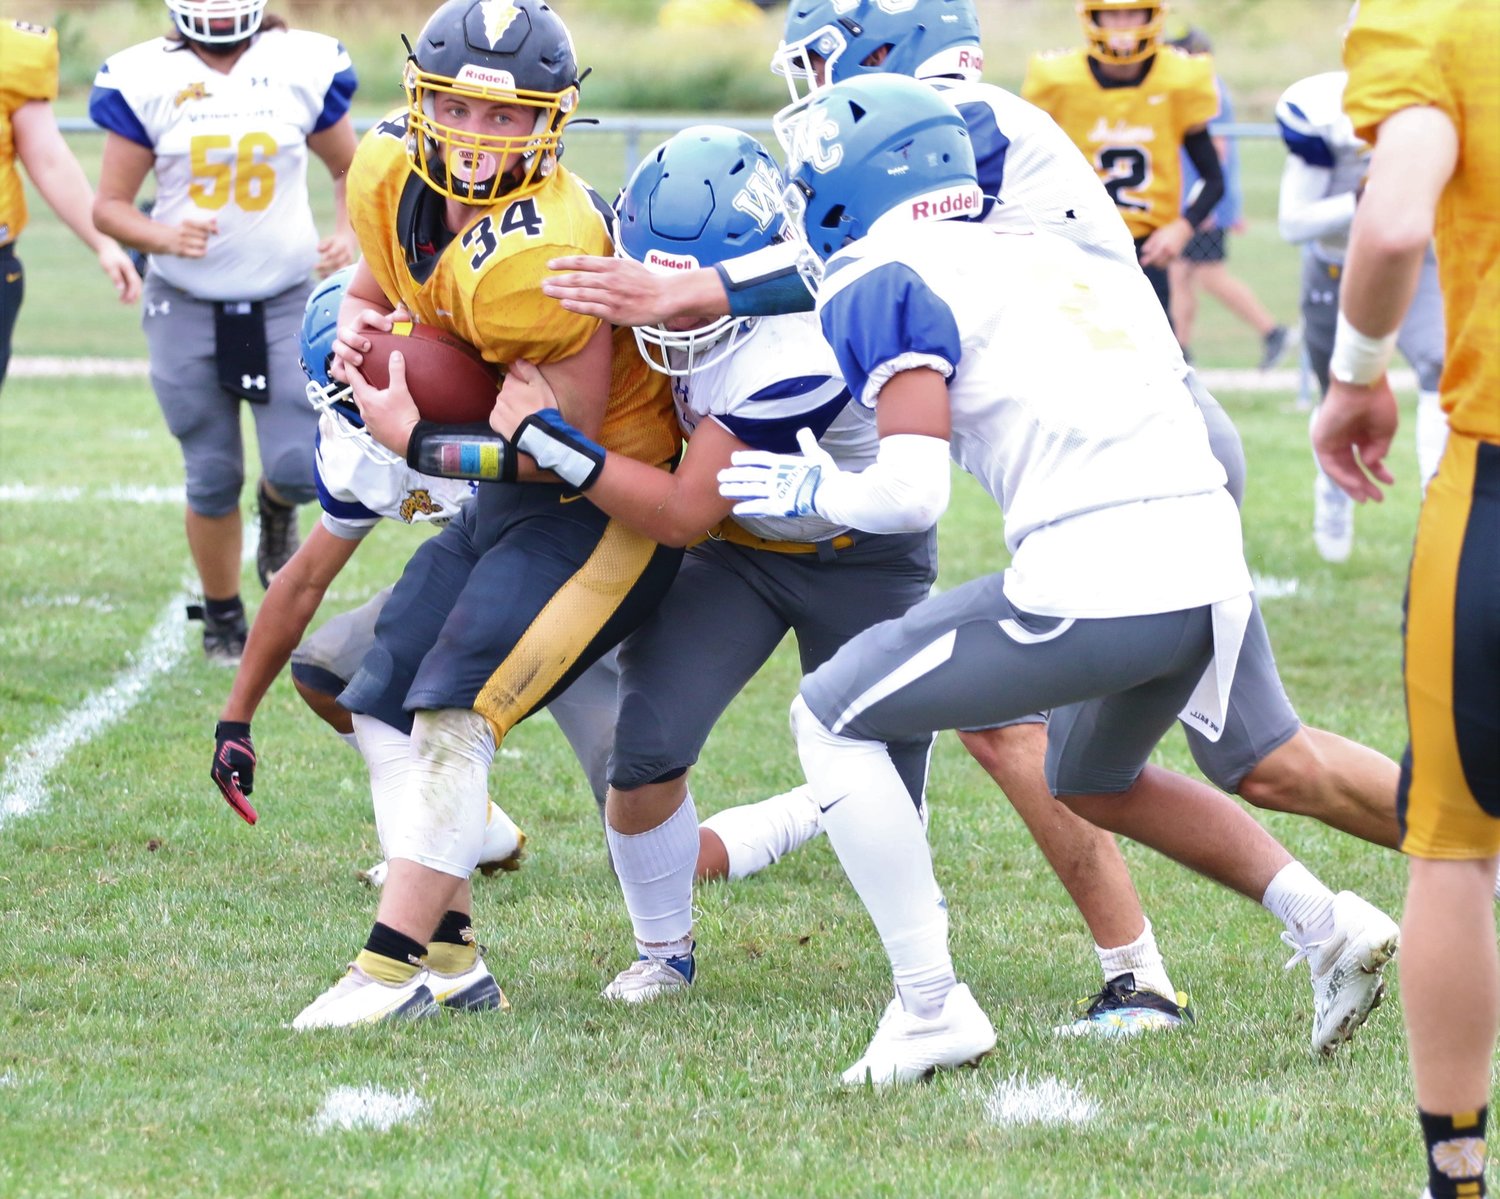 Van-Far’s Brandon Eoff fights for extra yardage in the Indians’ loss to Wright City on Saturday. [Dave Faries]